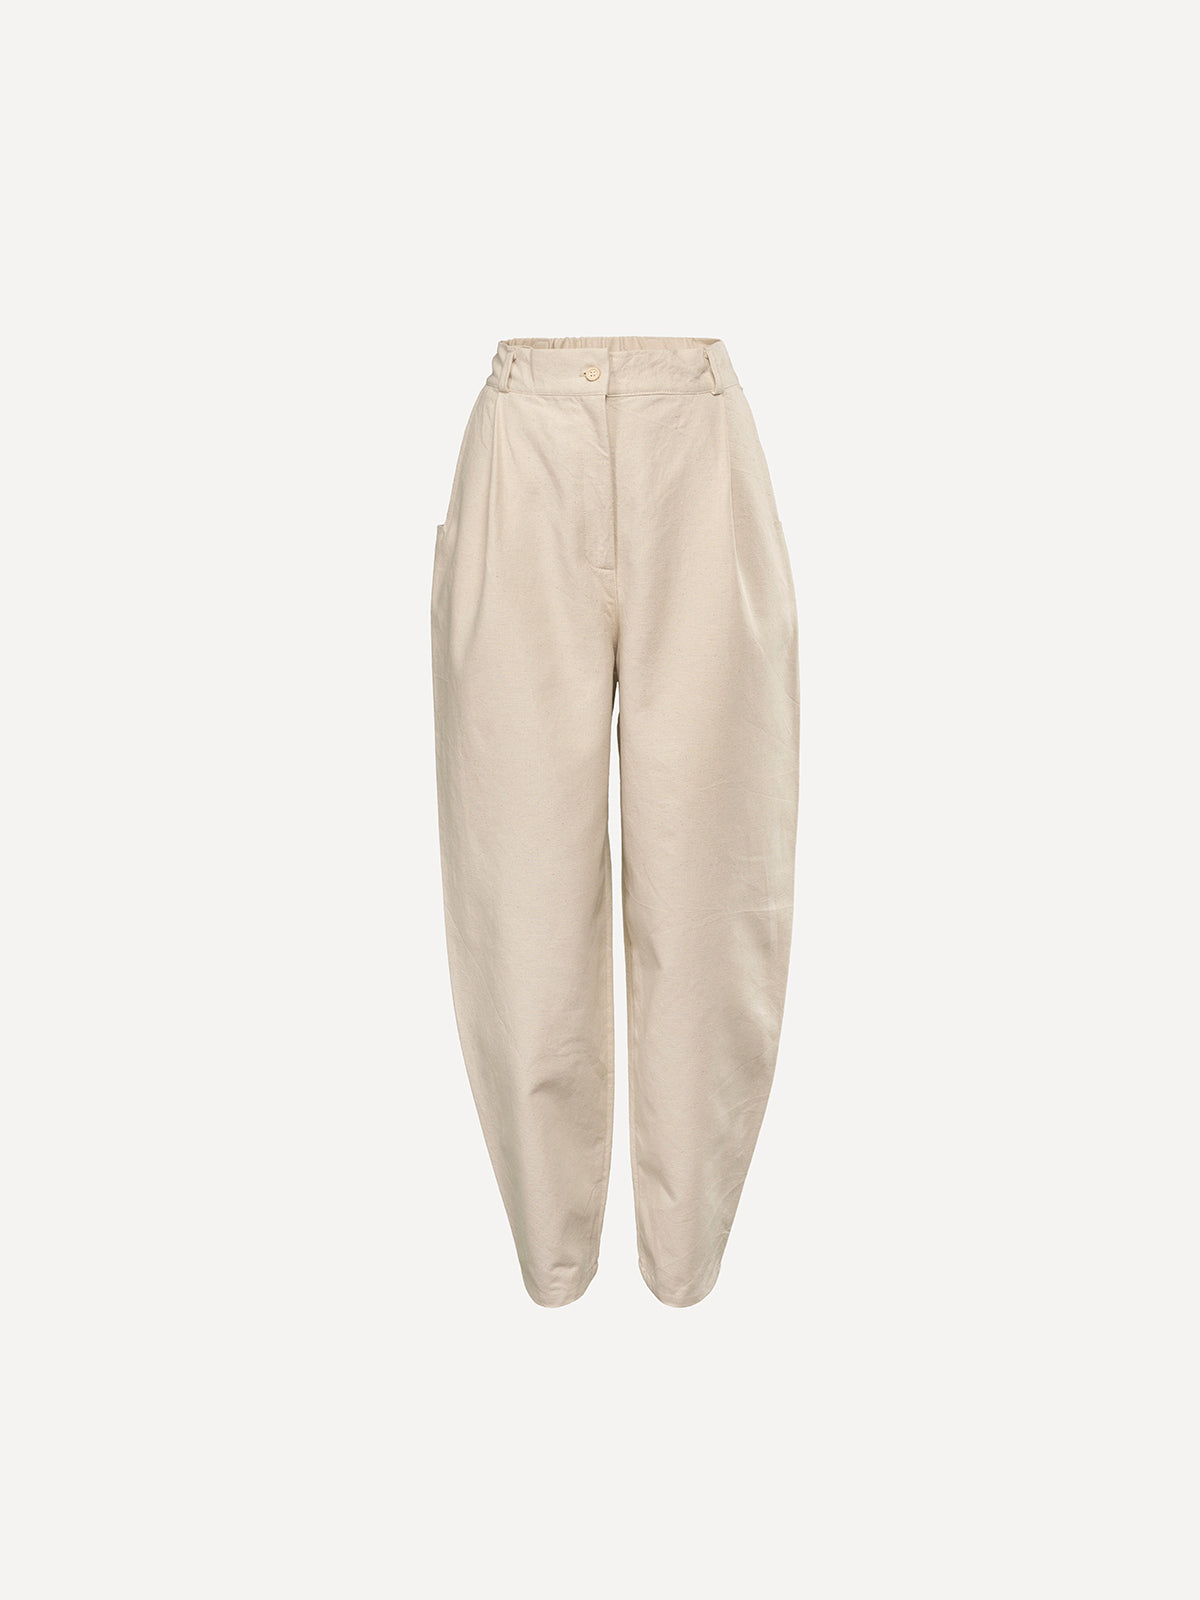 Slouchy women's pants in natural cotton canvas